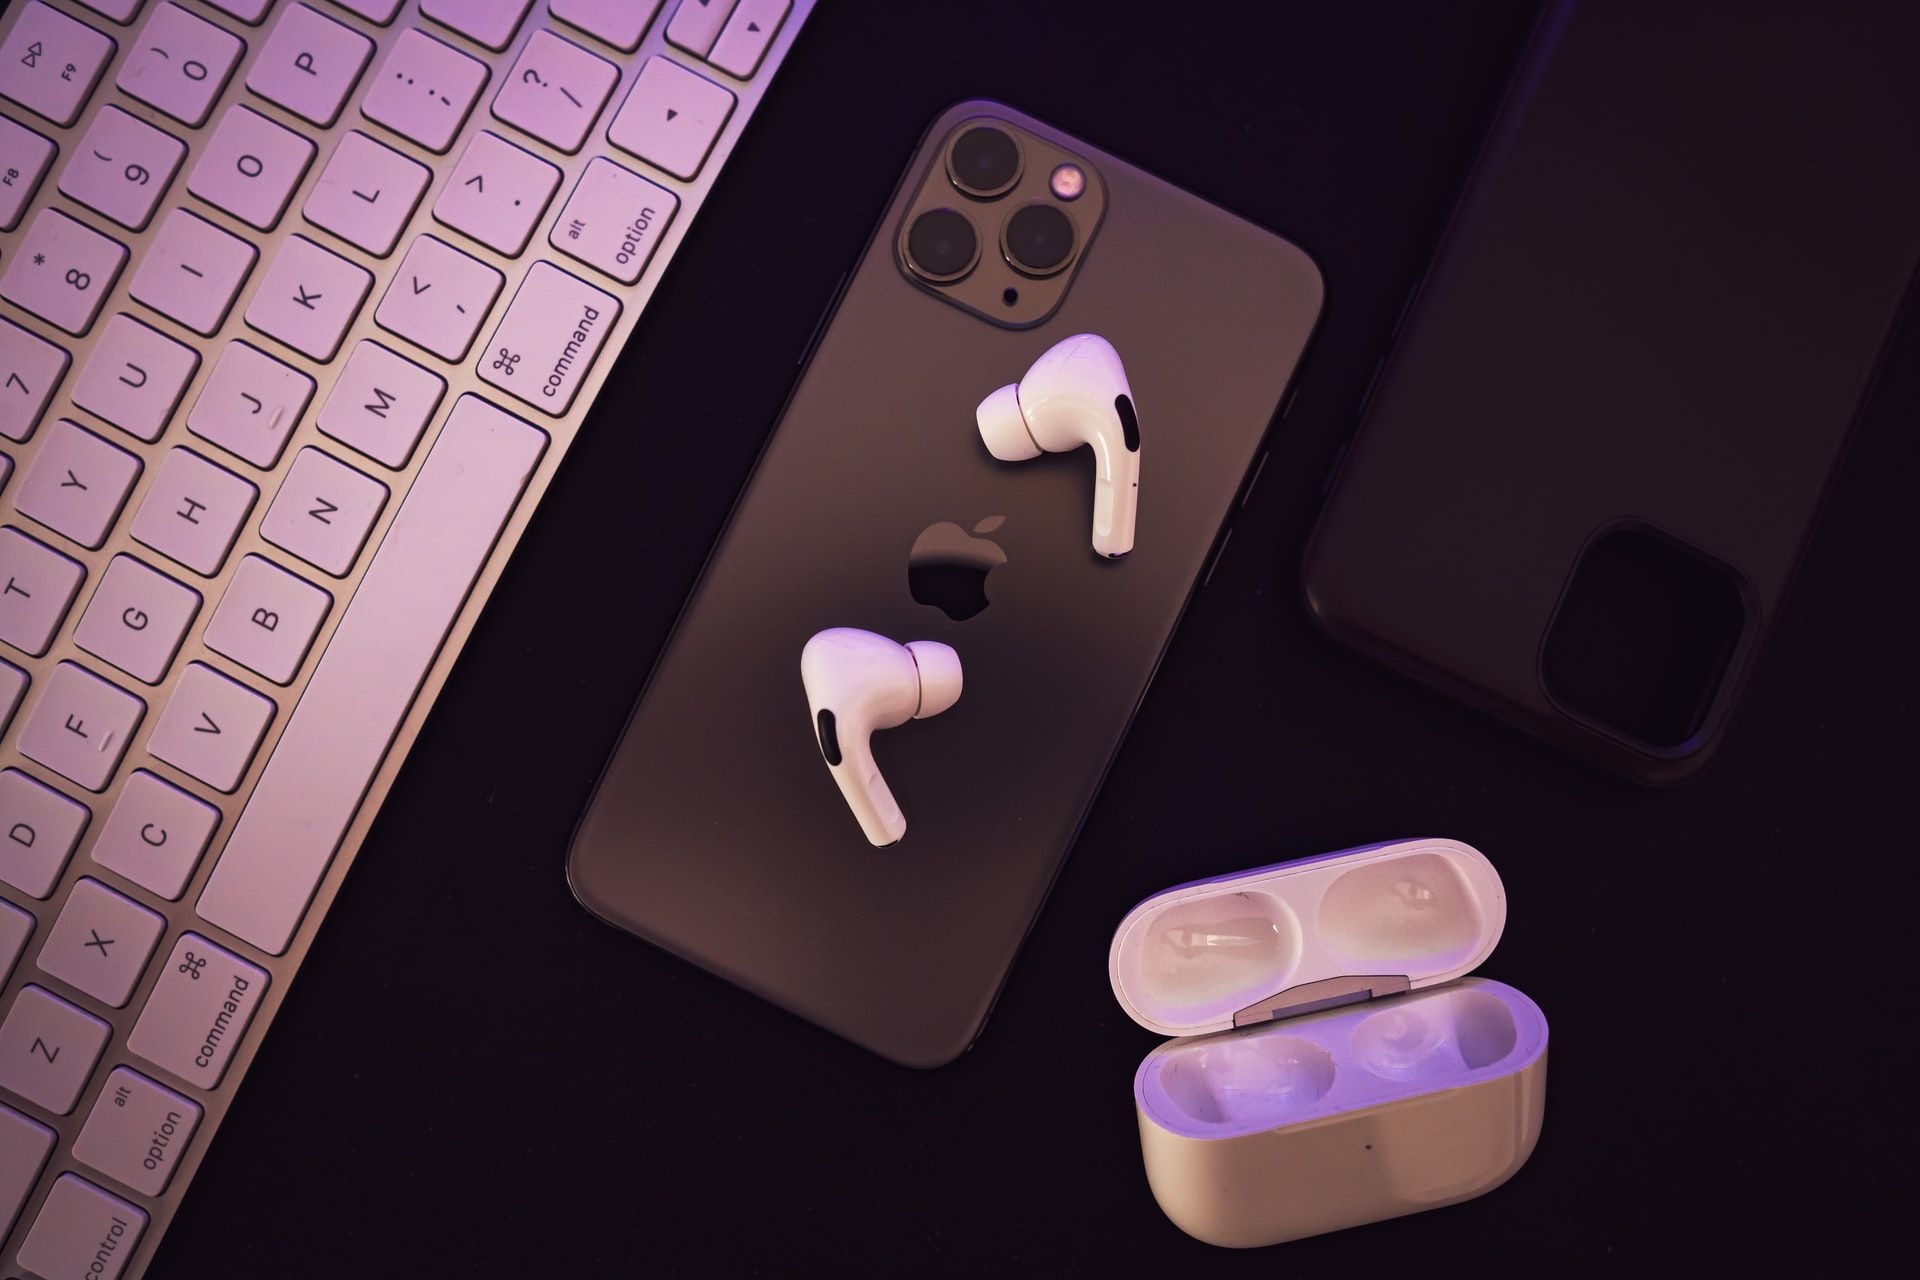 AirPods Pro on top of iPhone